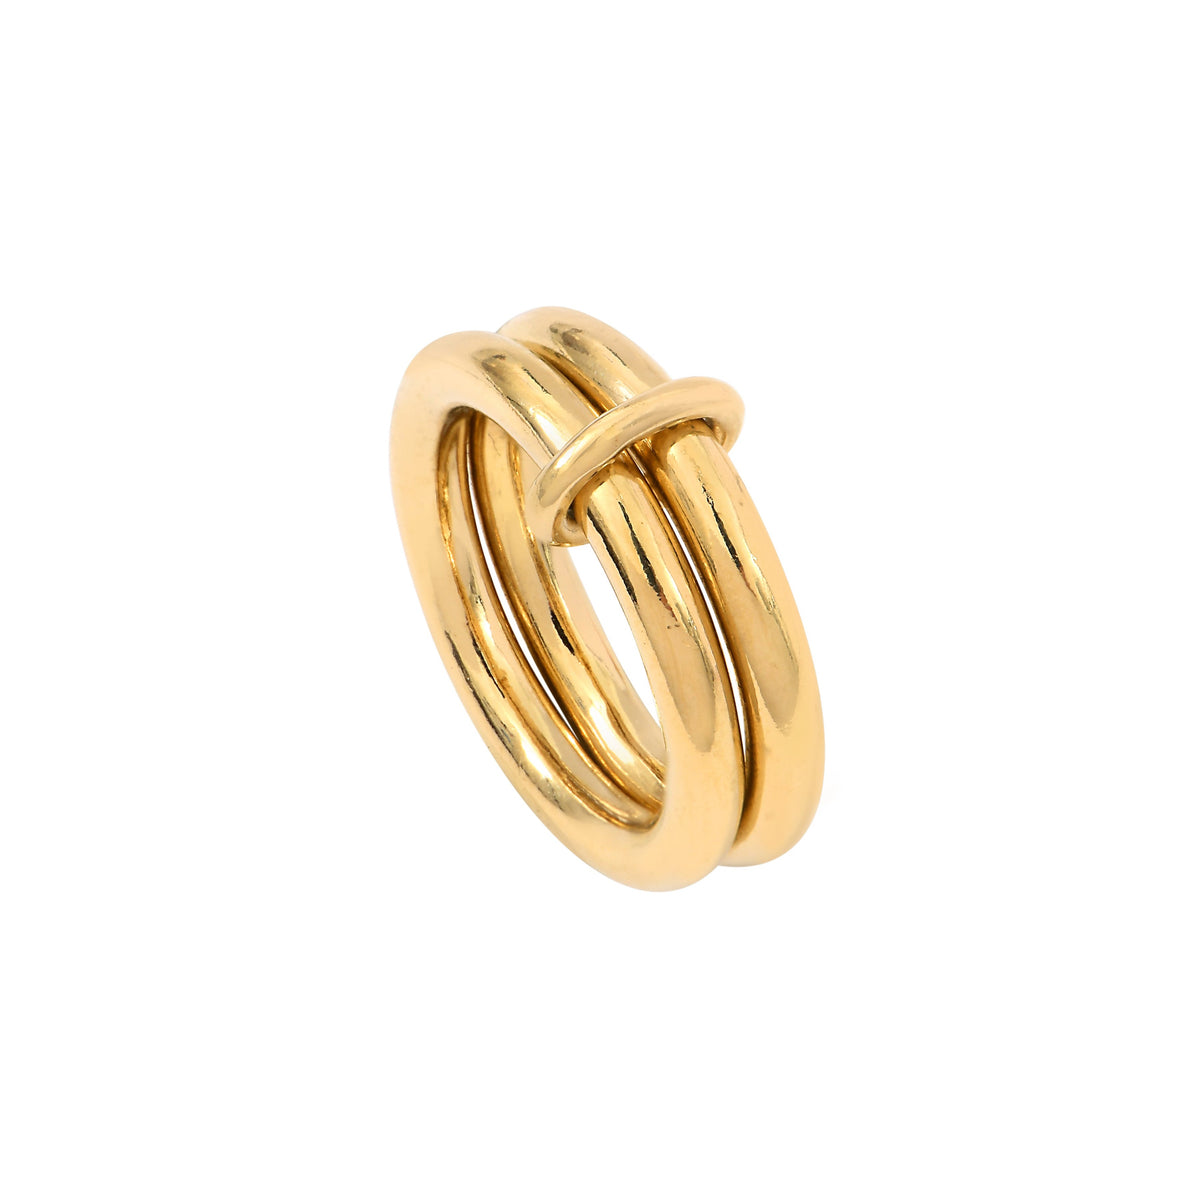 The gold plated silver Billie 3mm Ring is a gender free ring by jewelry designer Aurore Havenne